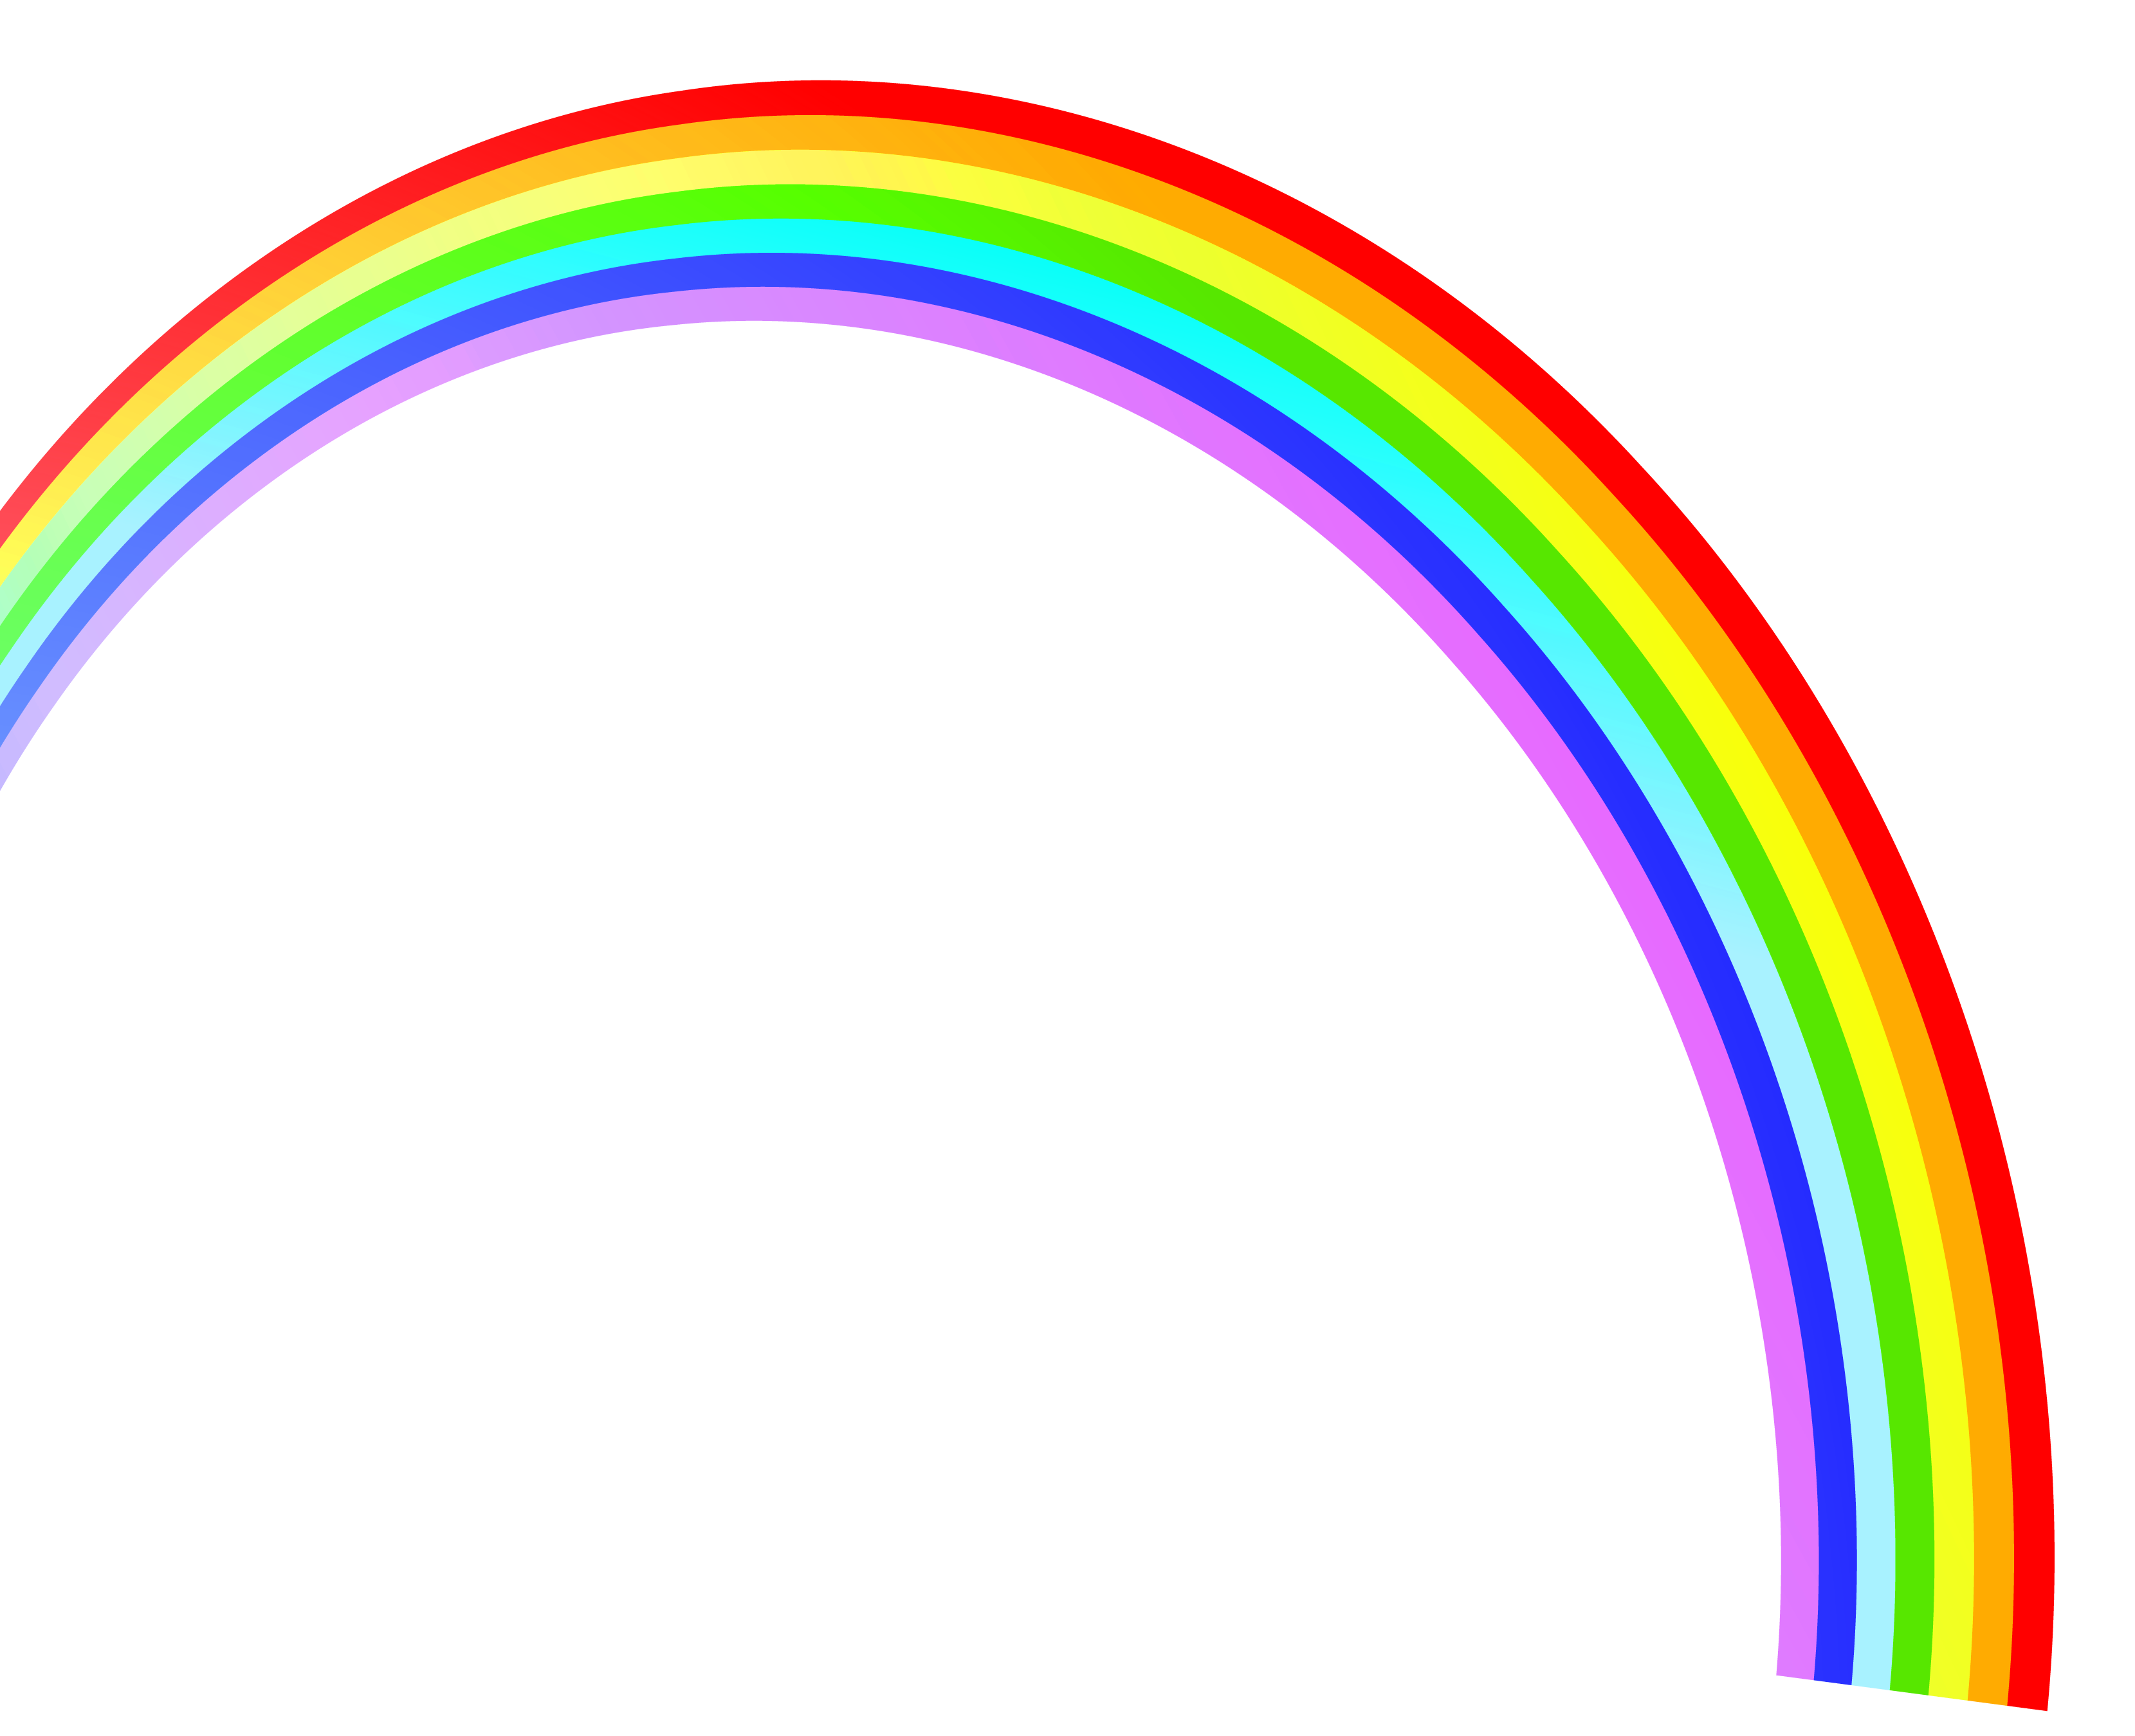 Rainbow Clip art - Rainbow Clipart png download - 3319*2699 - Free ...